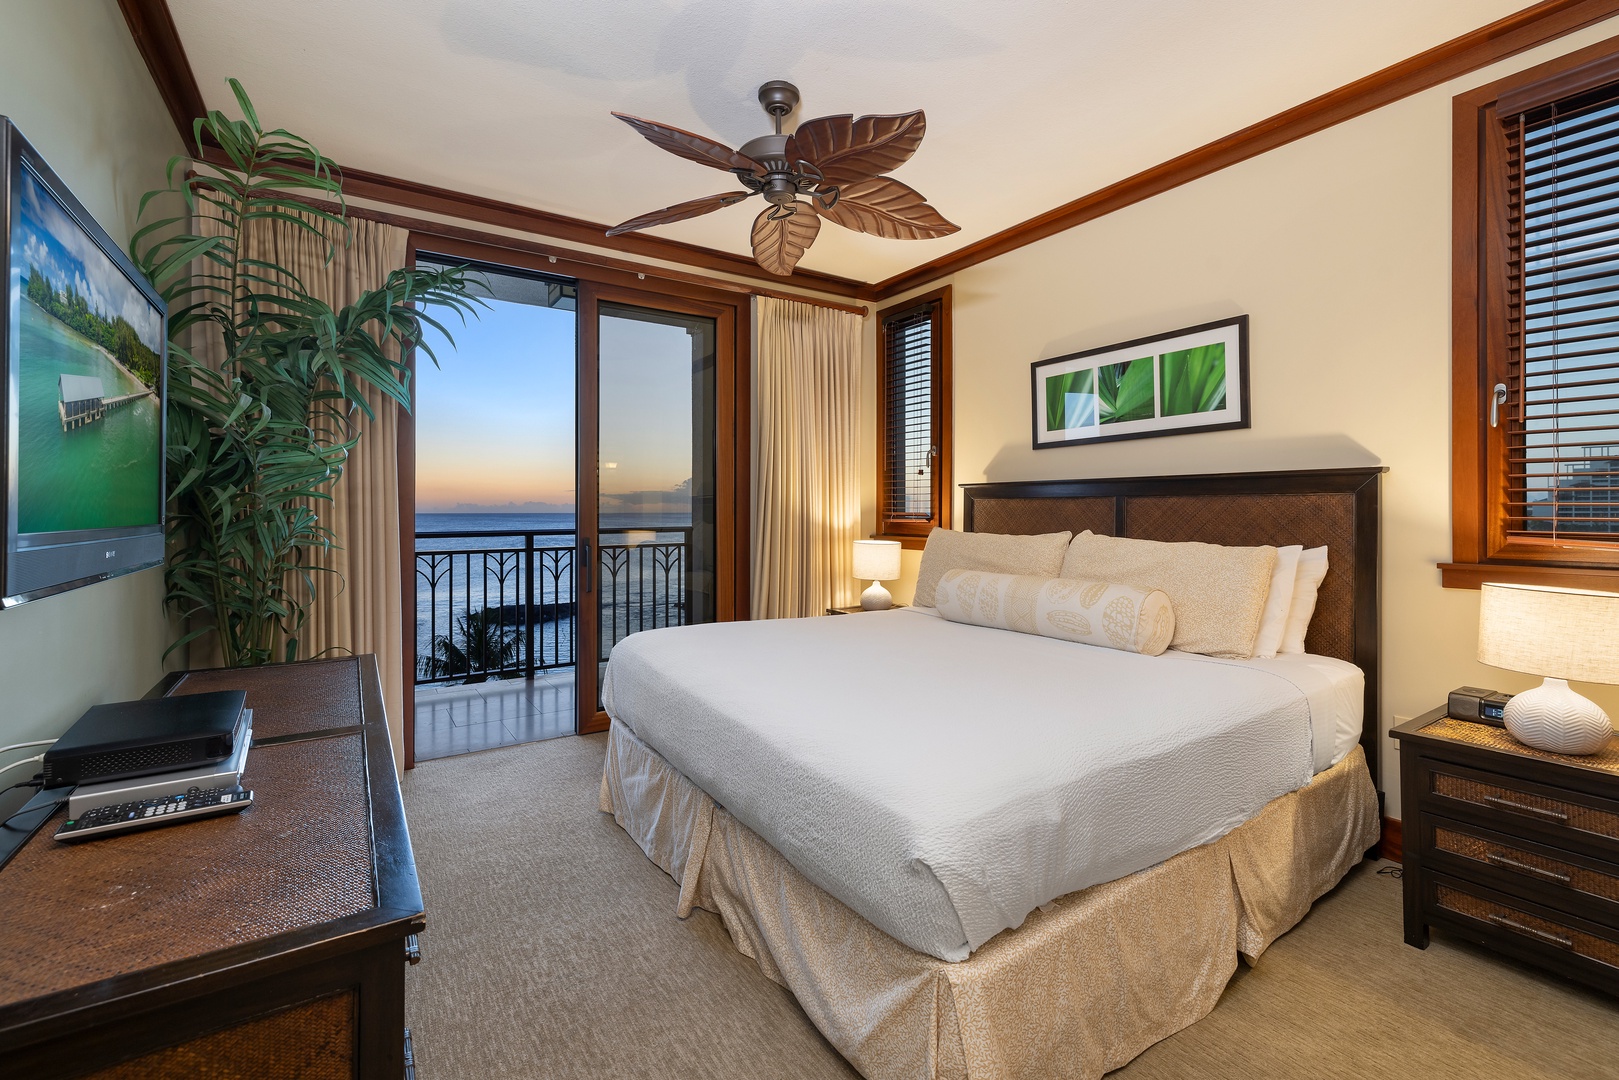 Kapolei Vacation Rentals, Ko Olina Beach Villas B610 - The primary guest bedroom with incredible scenery and a TV.